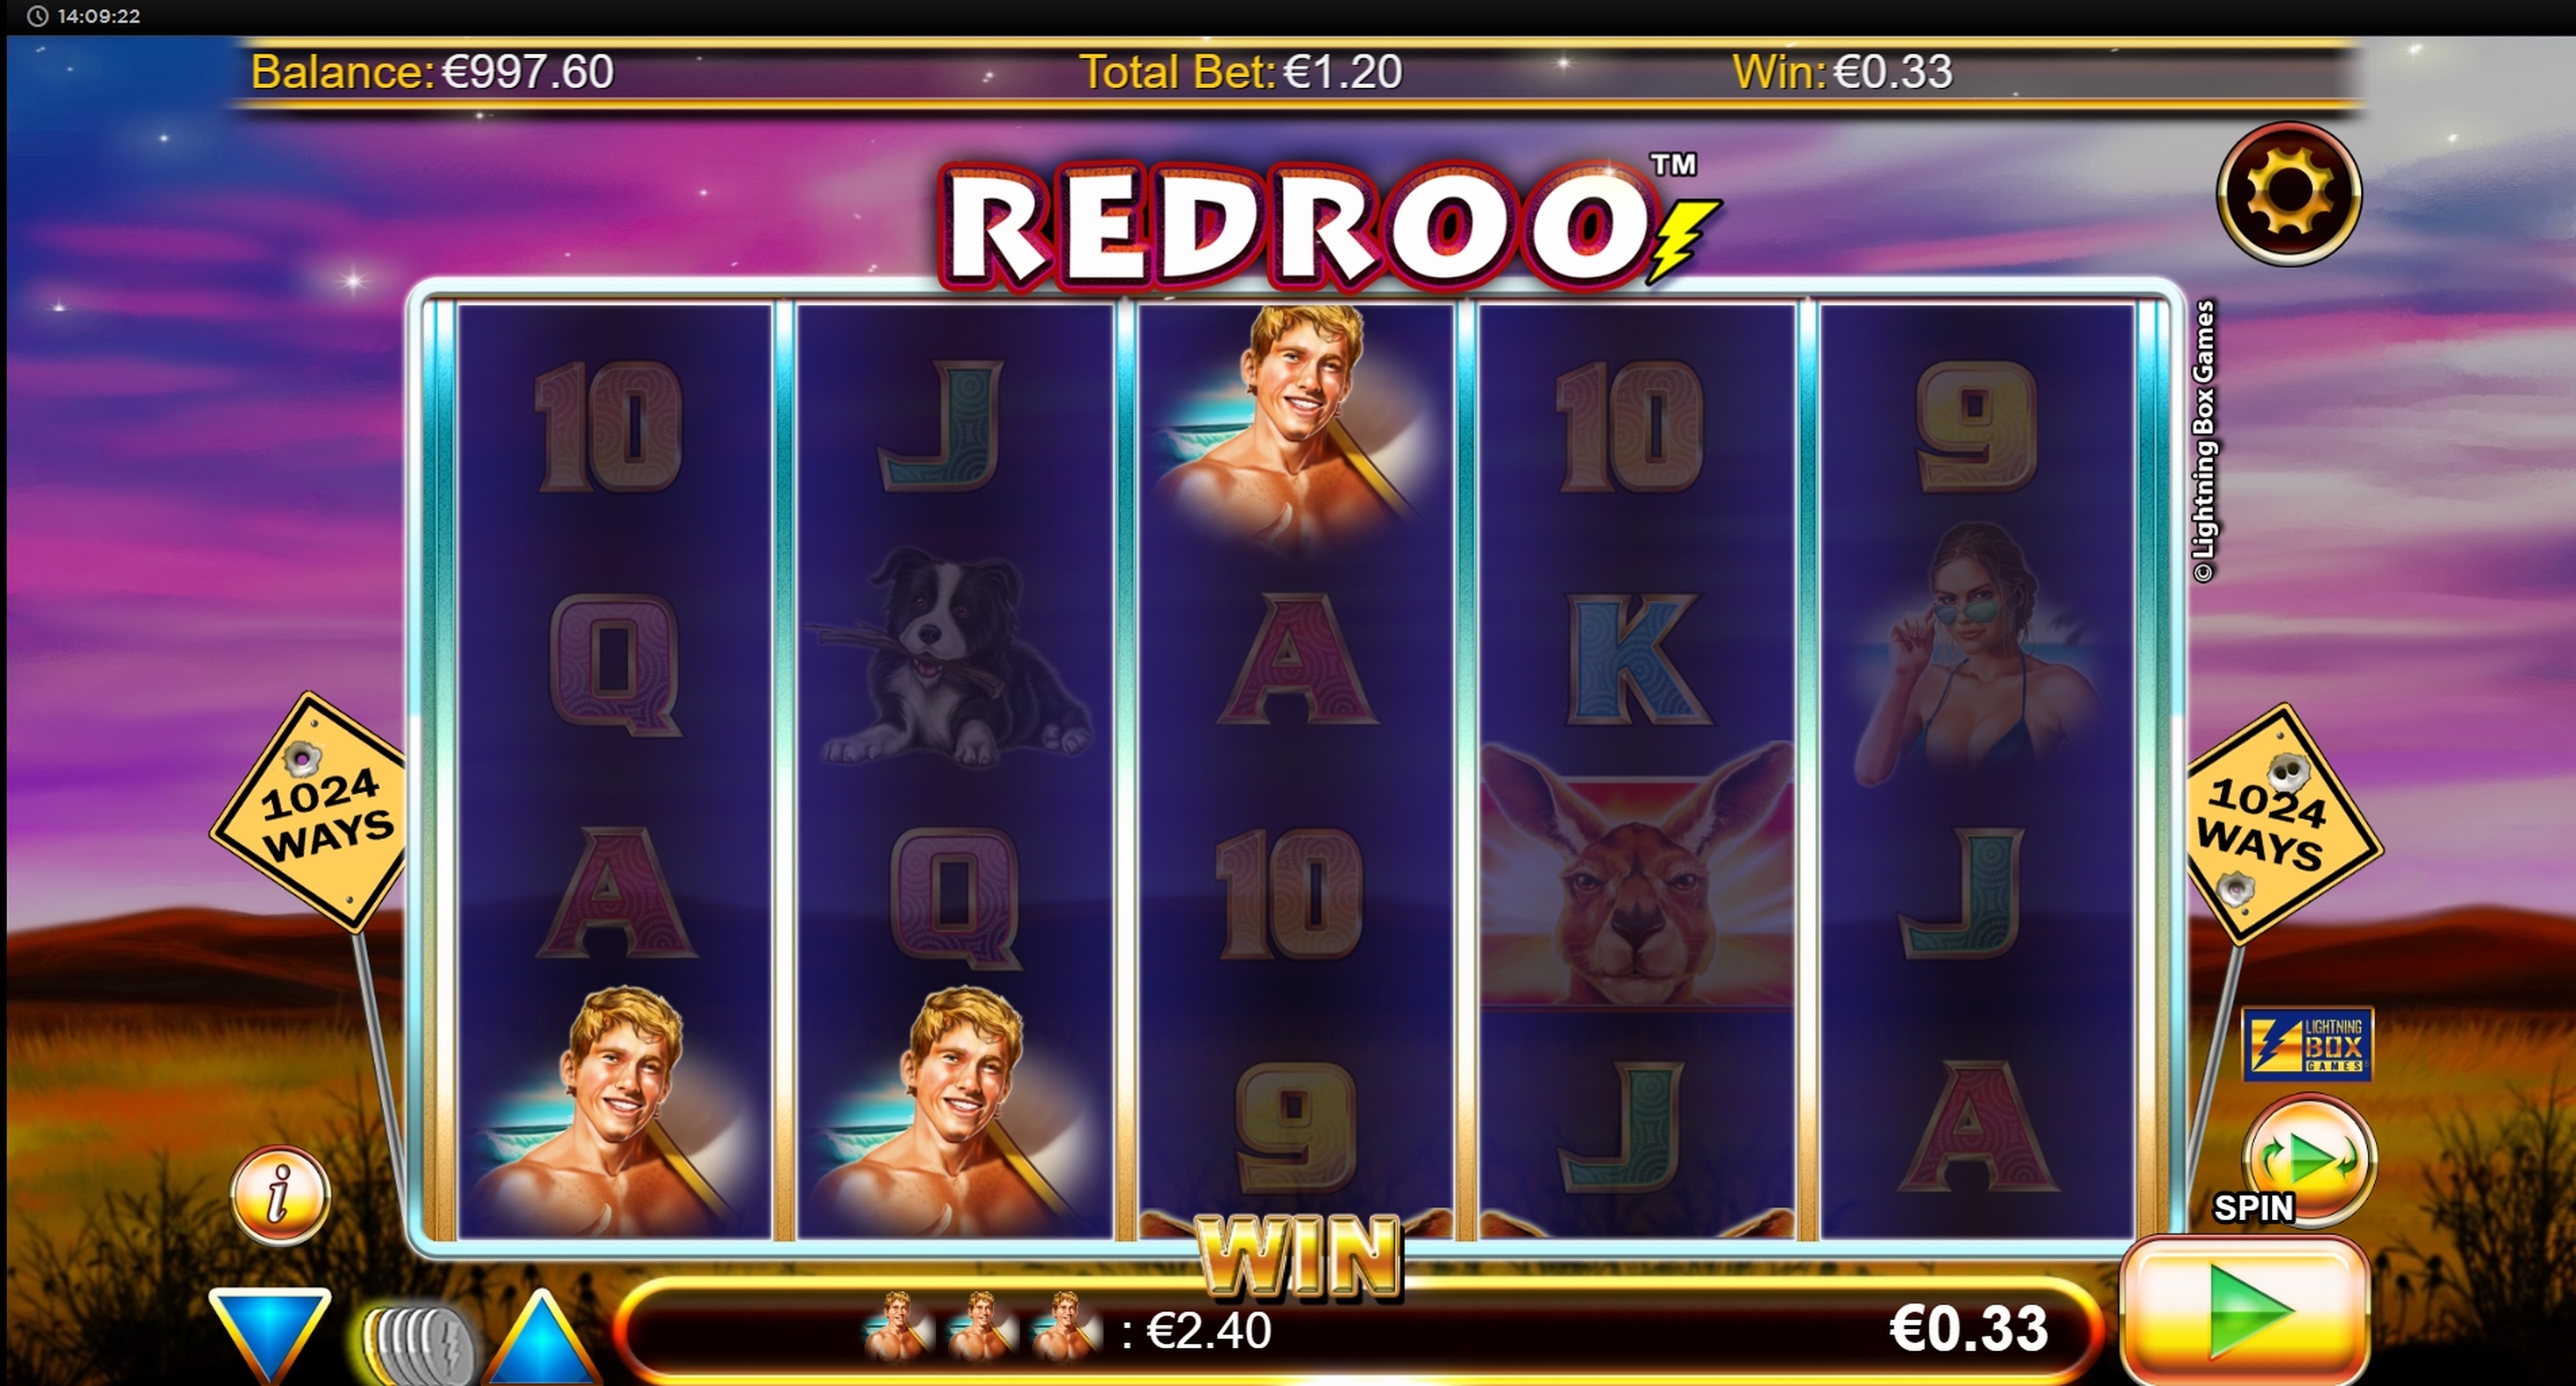 Win Money in Redroo Free Slot Game by Lightning Box